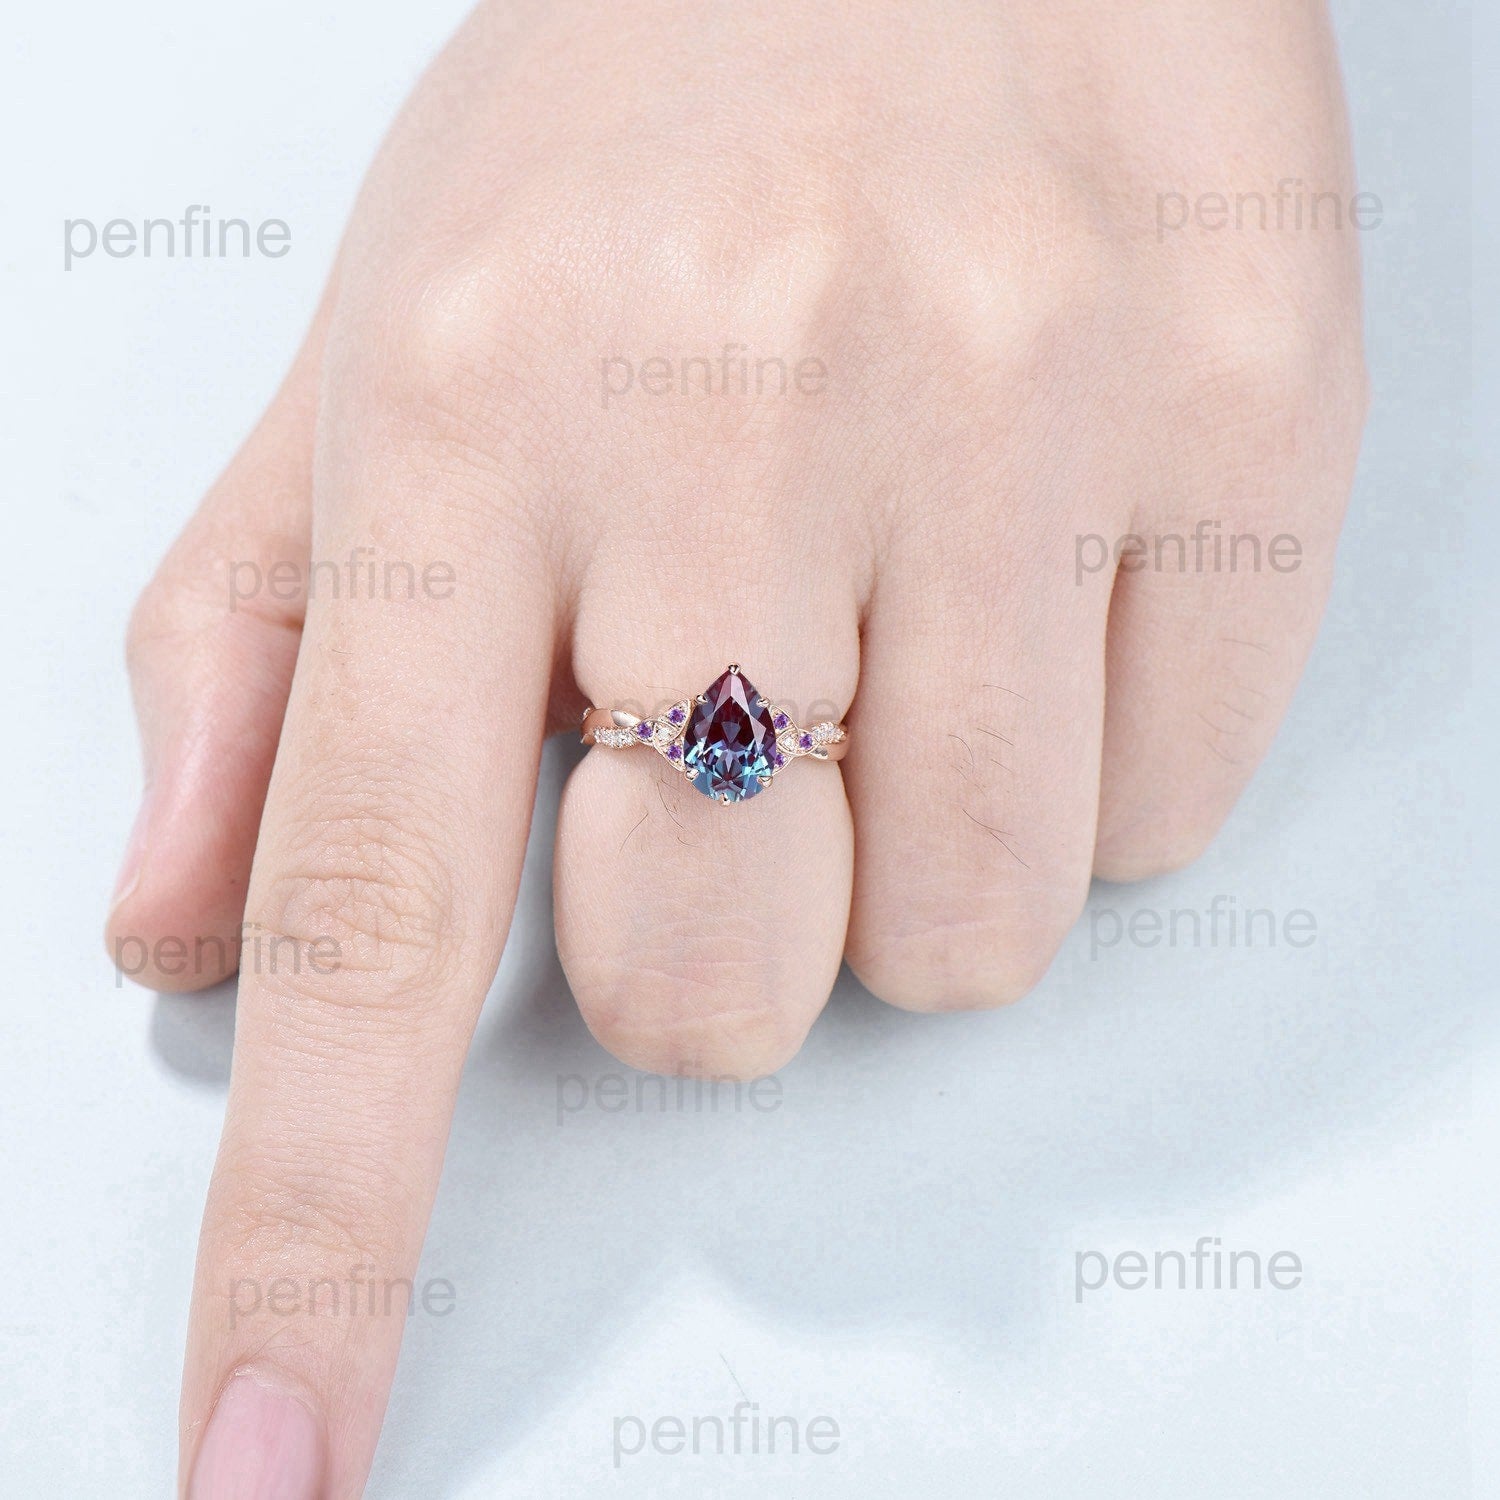 Vintage alexandrite ring 6x9mm Pear Shaped alexandrite engagement ring Norse Viking infinity amethyst wedding ring Twig anniversary gift - PENFINE